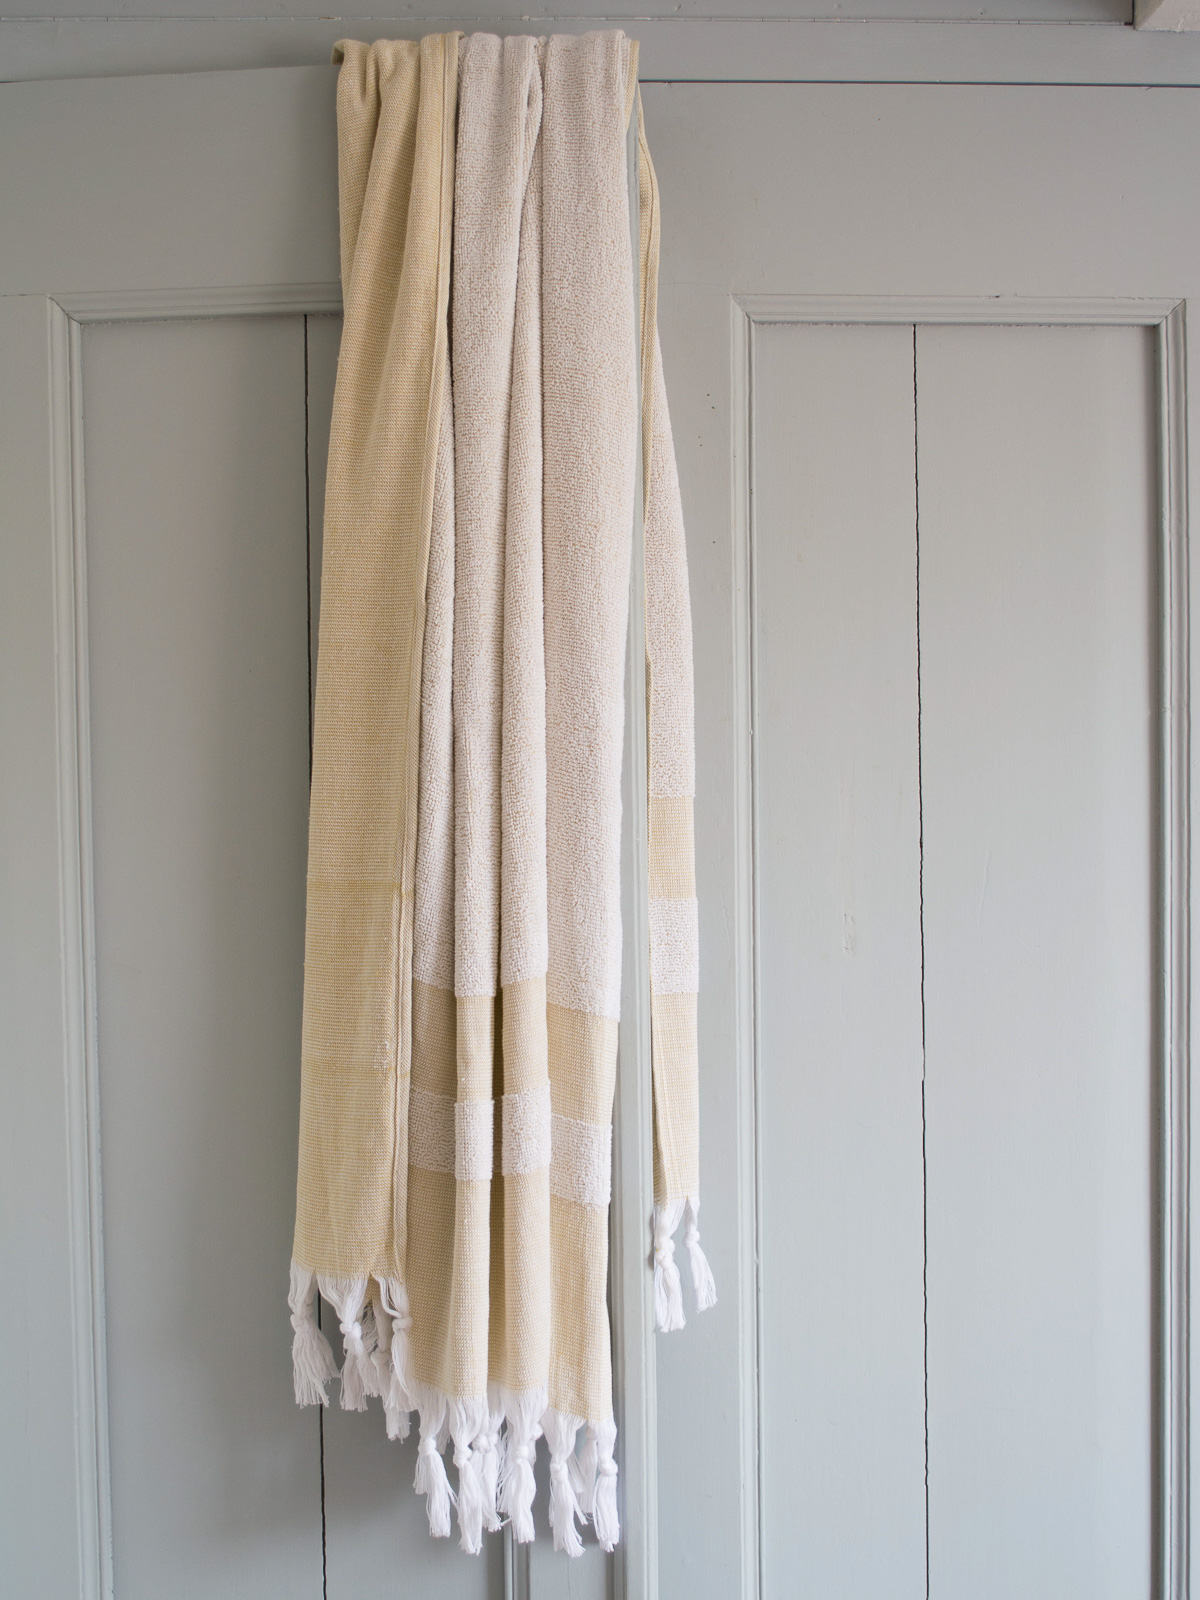 hammam towel with terry cloth, mustard